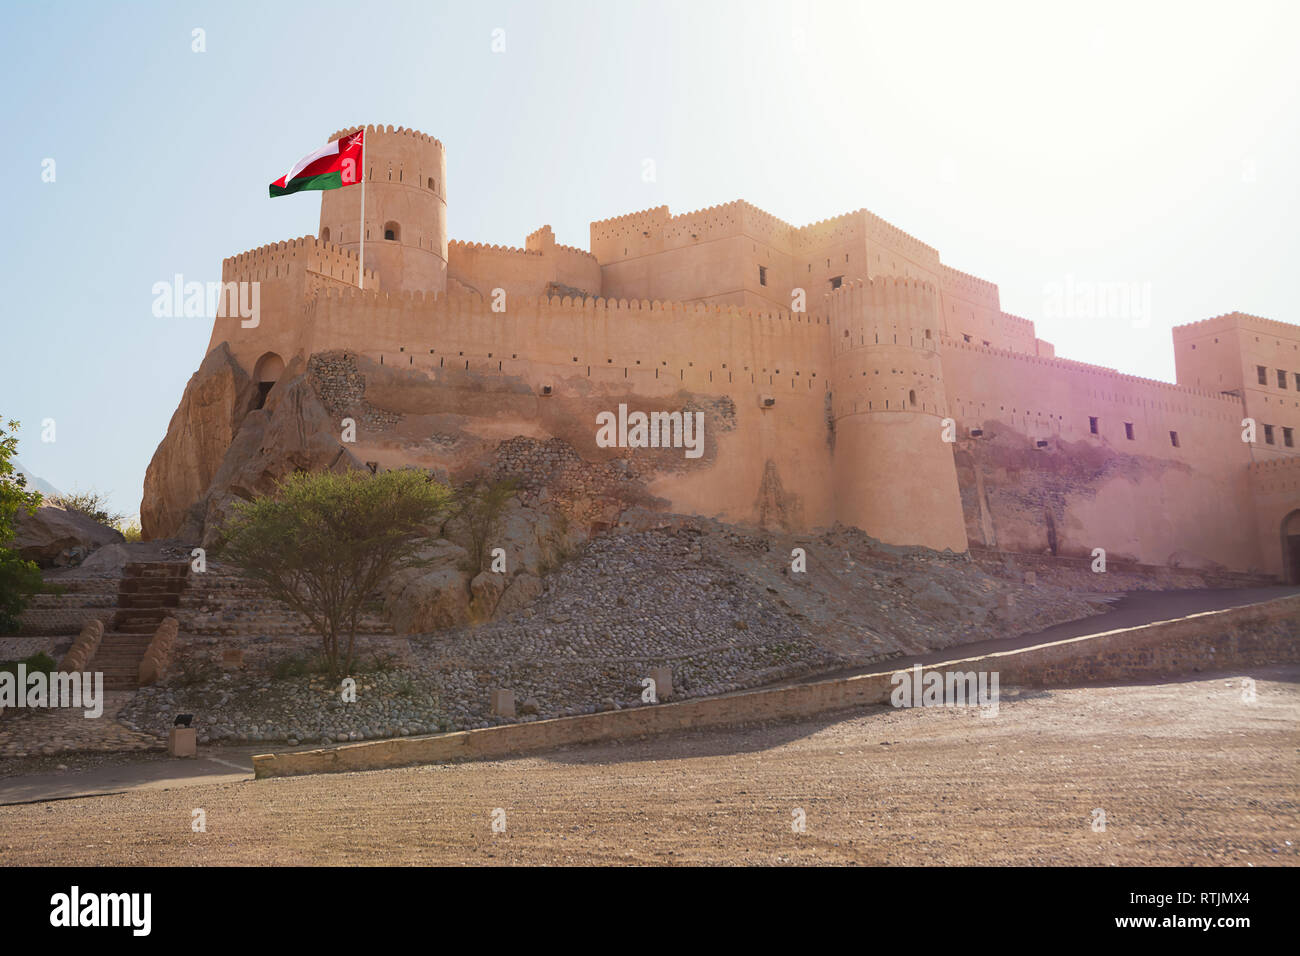 Ancient Fort of Nakhal with flag (Oman) Stock Photo